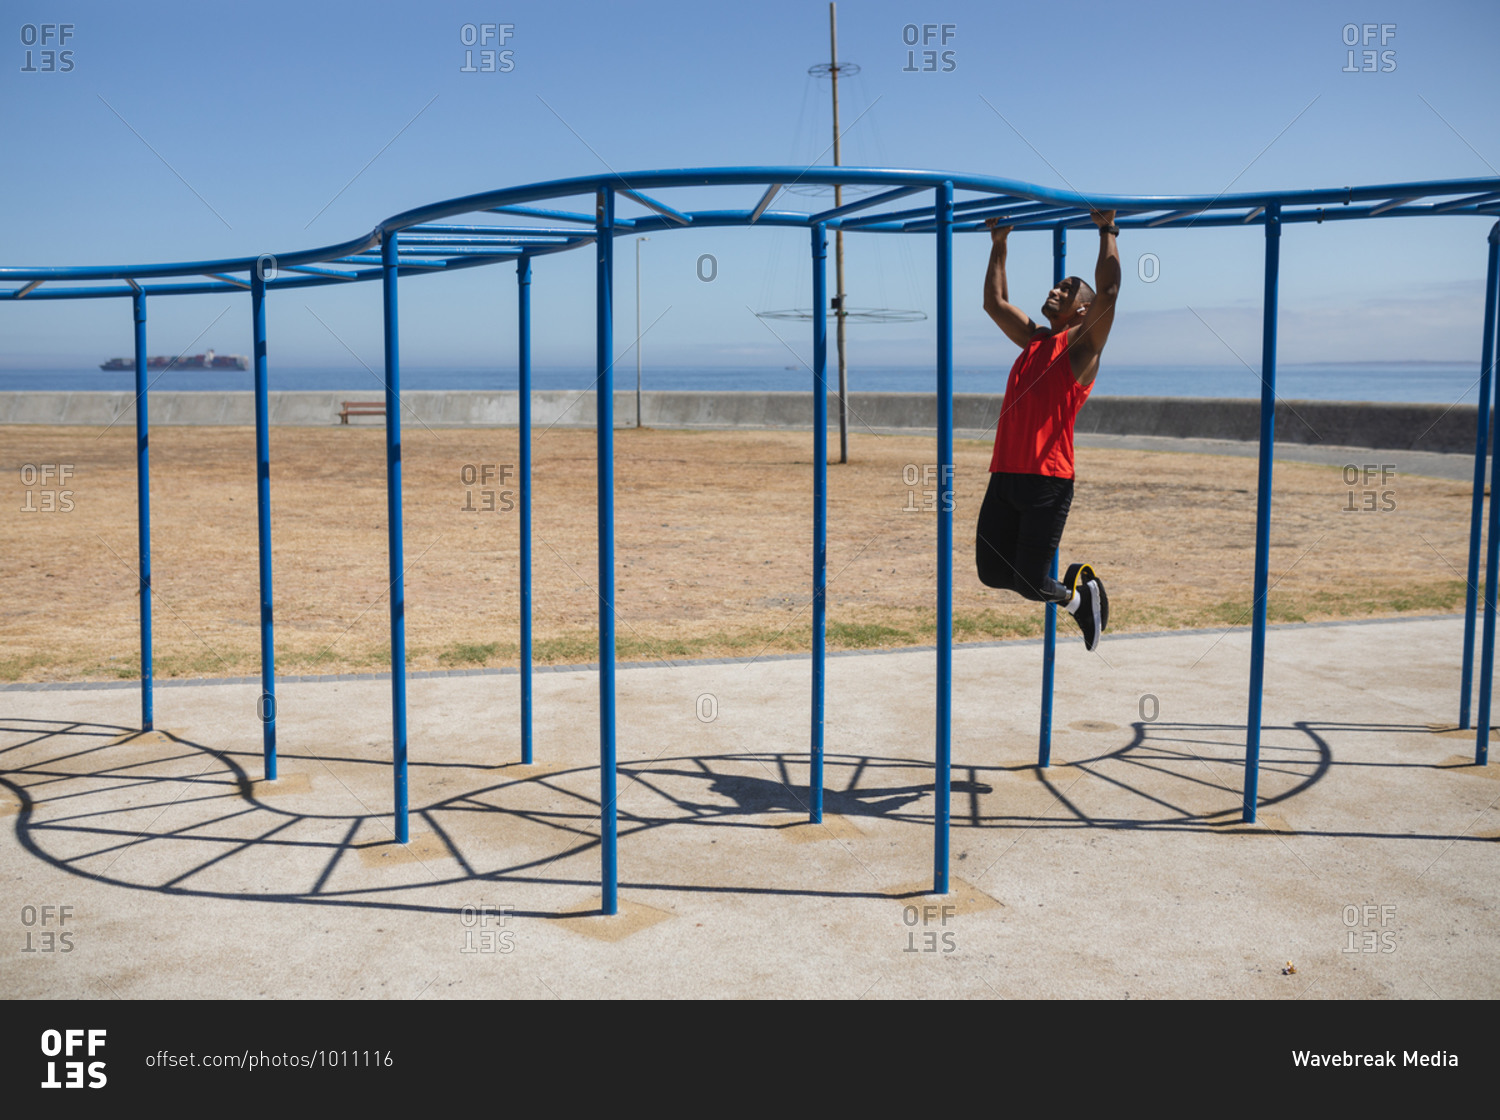 Disabled mixed race man with a prosthetic leg and running blade exercising at an outdoor gym by the coast, working out on the monkey bars. Fitness disability healthy lifestyle.